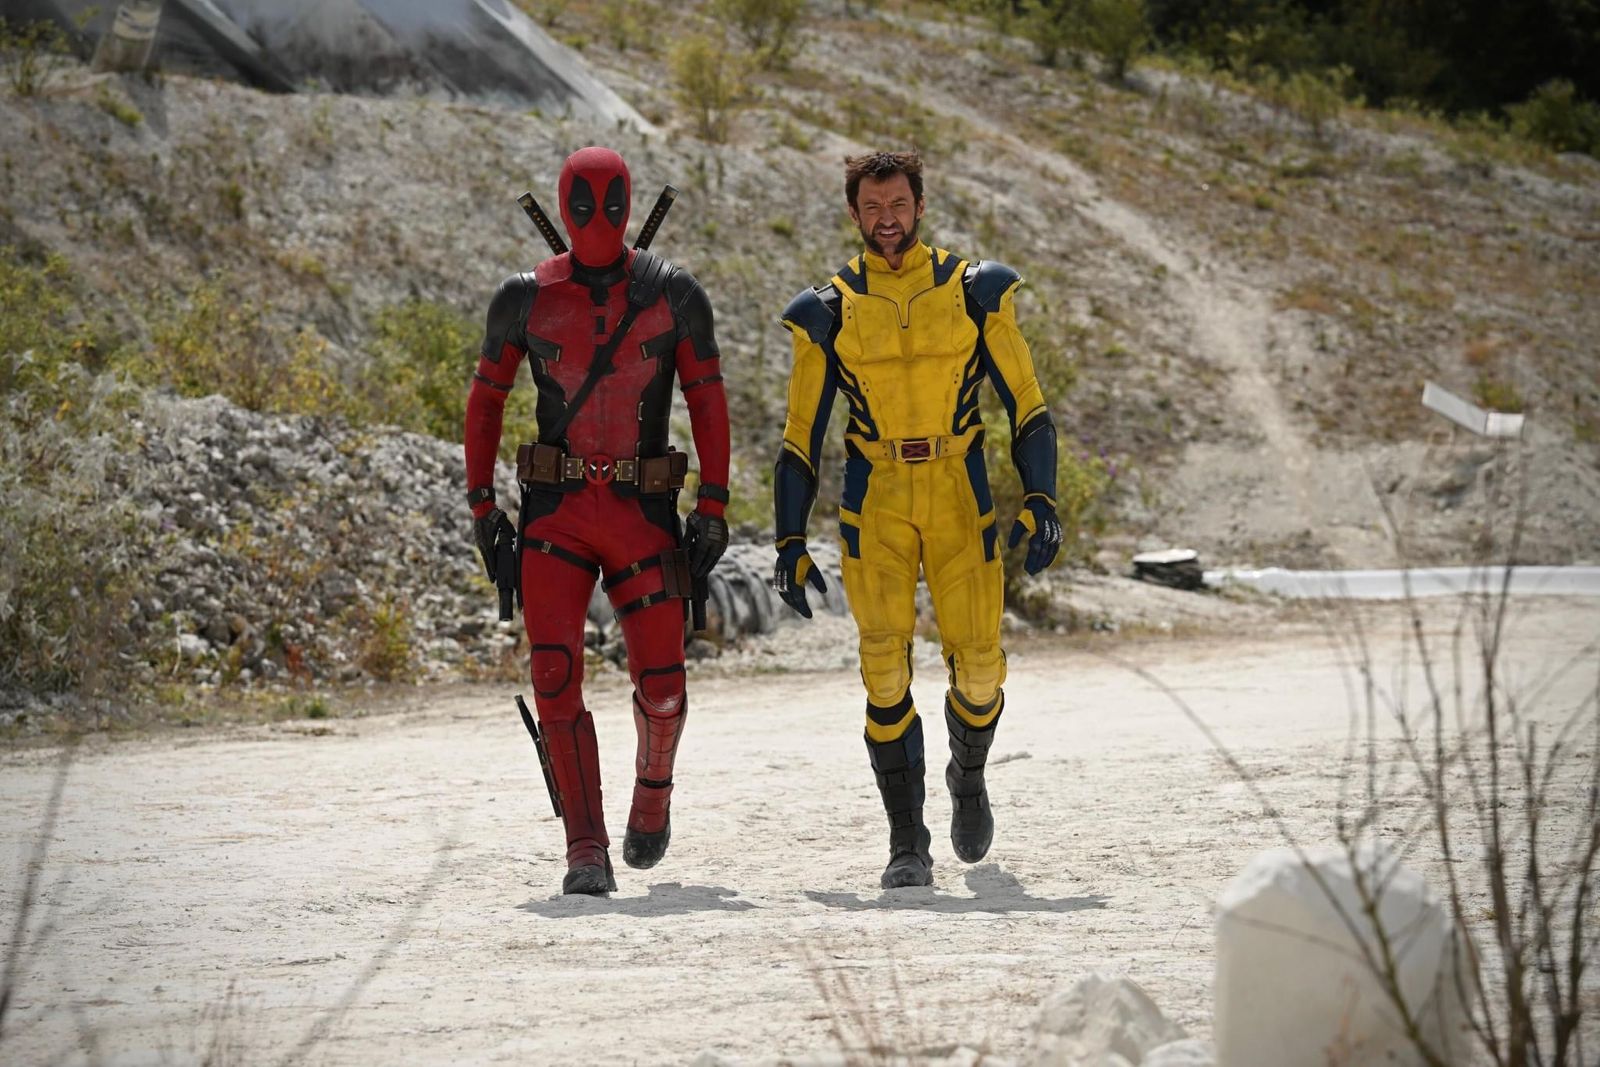 FRANCHISE: Deadpool 3 hits our screens around July, featuring Ryan Reynolds and Hugh Jackman